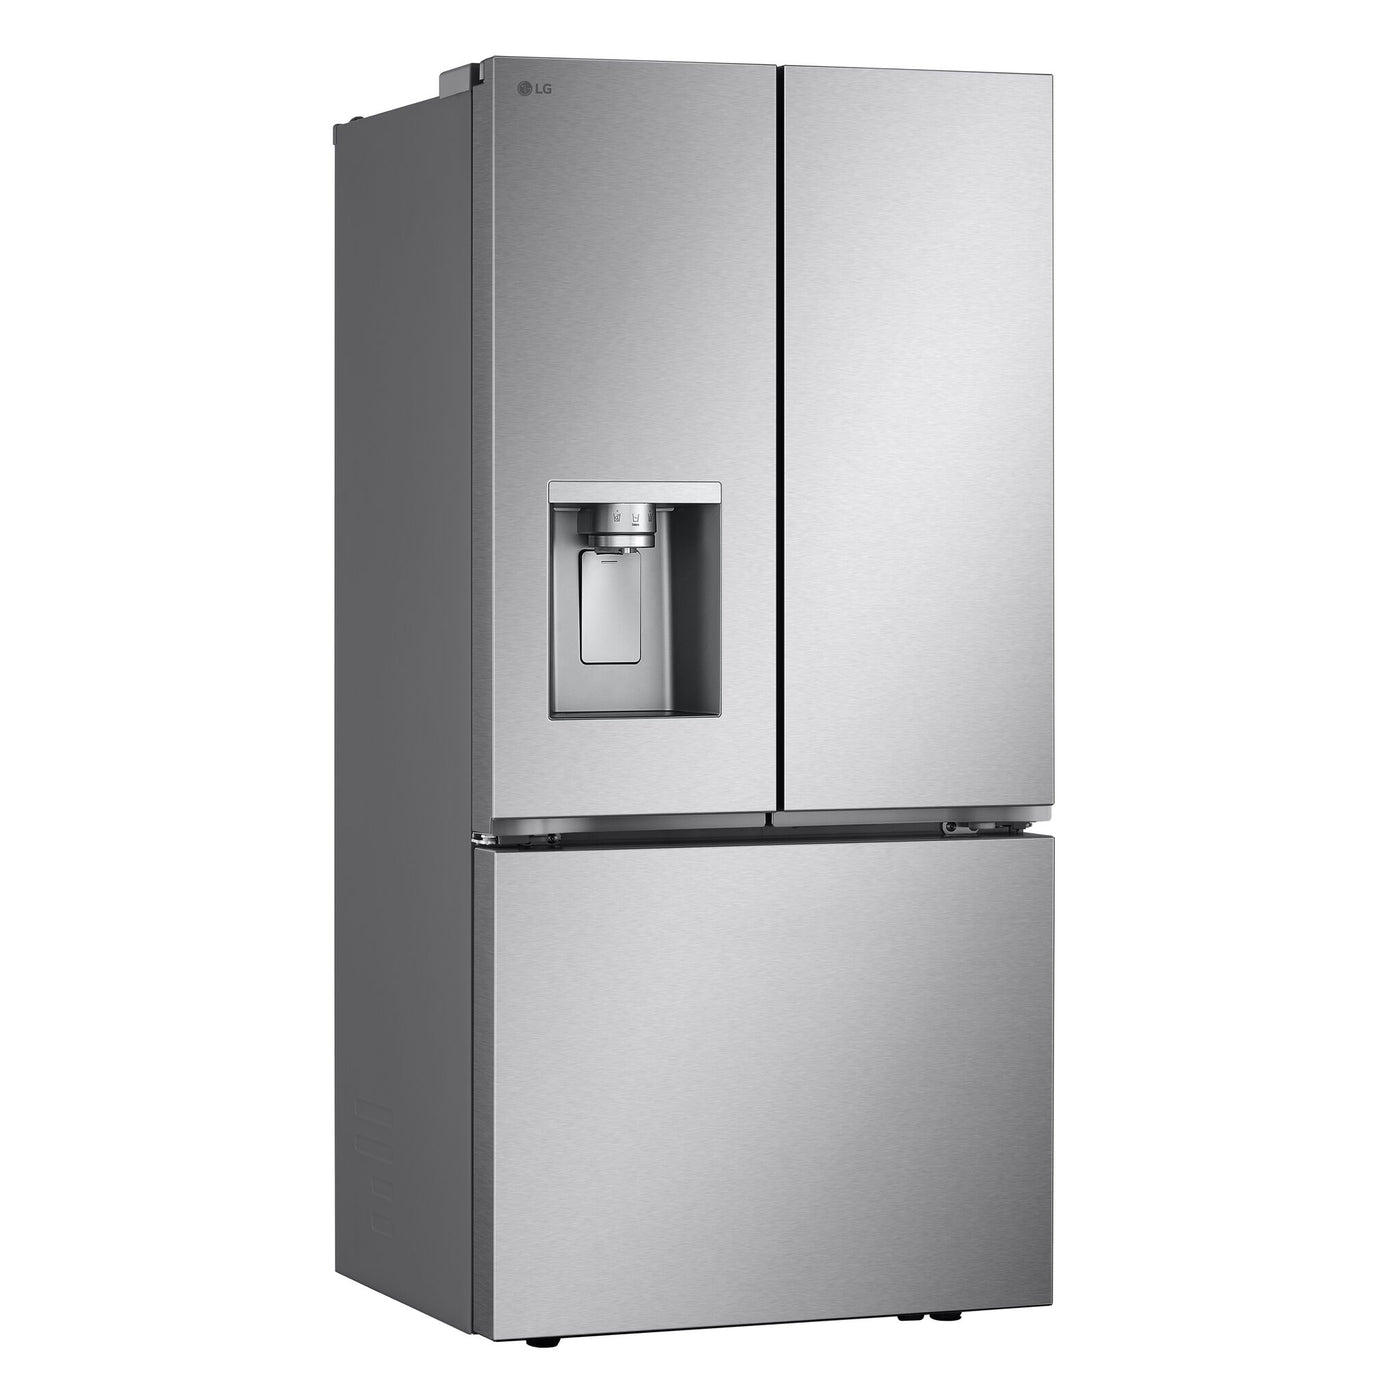 LG Smudge Proof Stainless Steel Counter-Depth MAX™ French Door Refrigerator (20 cu. ft.) - LF20C6330S